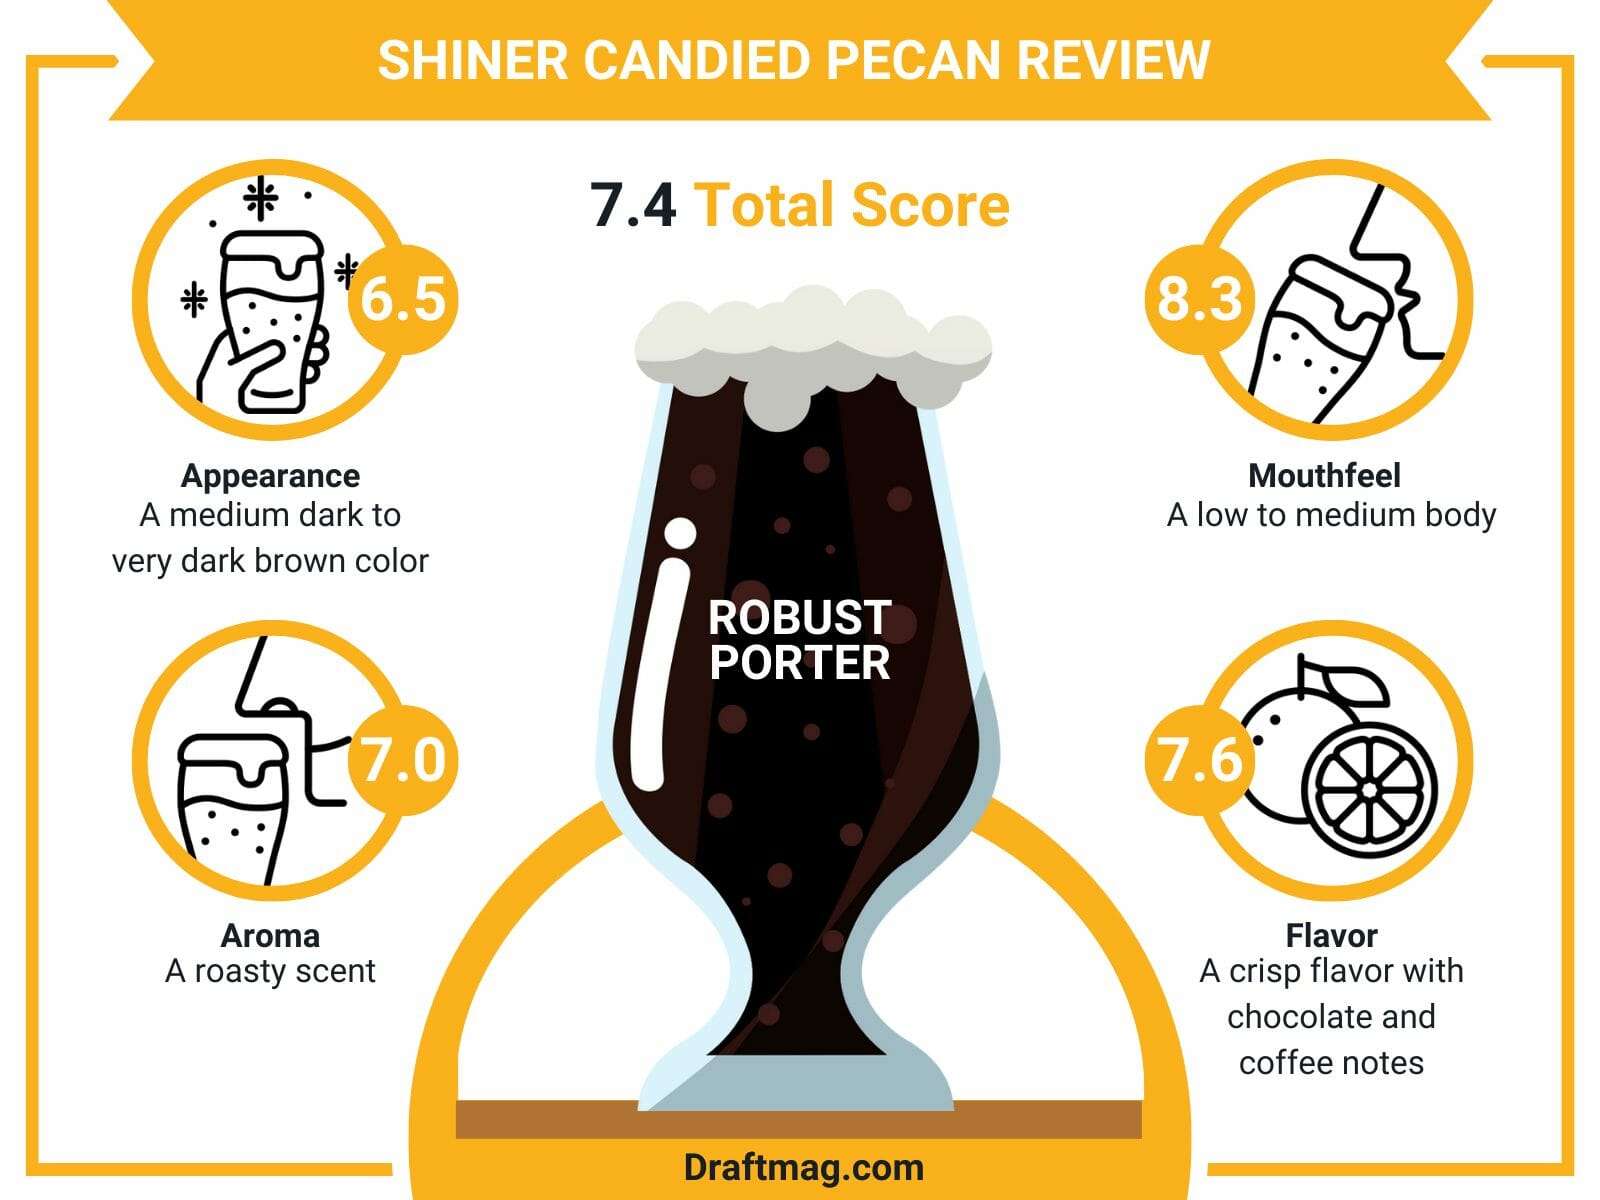 Shiner Candied Pecan Review Infographic